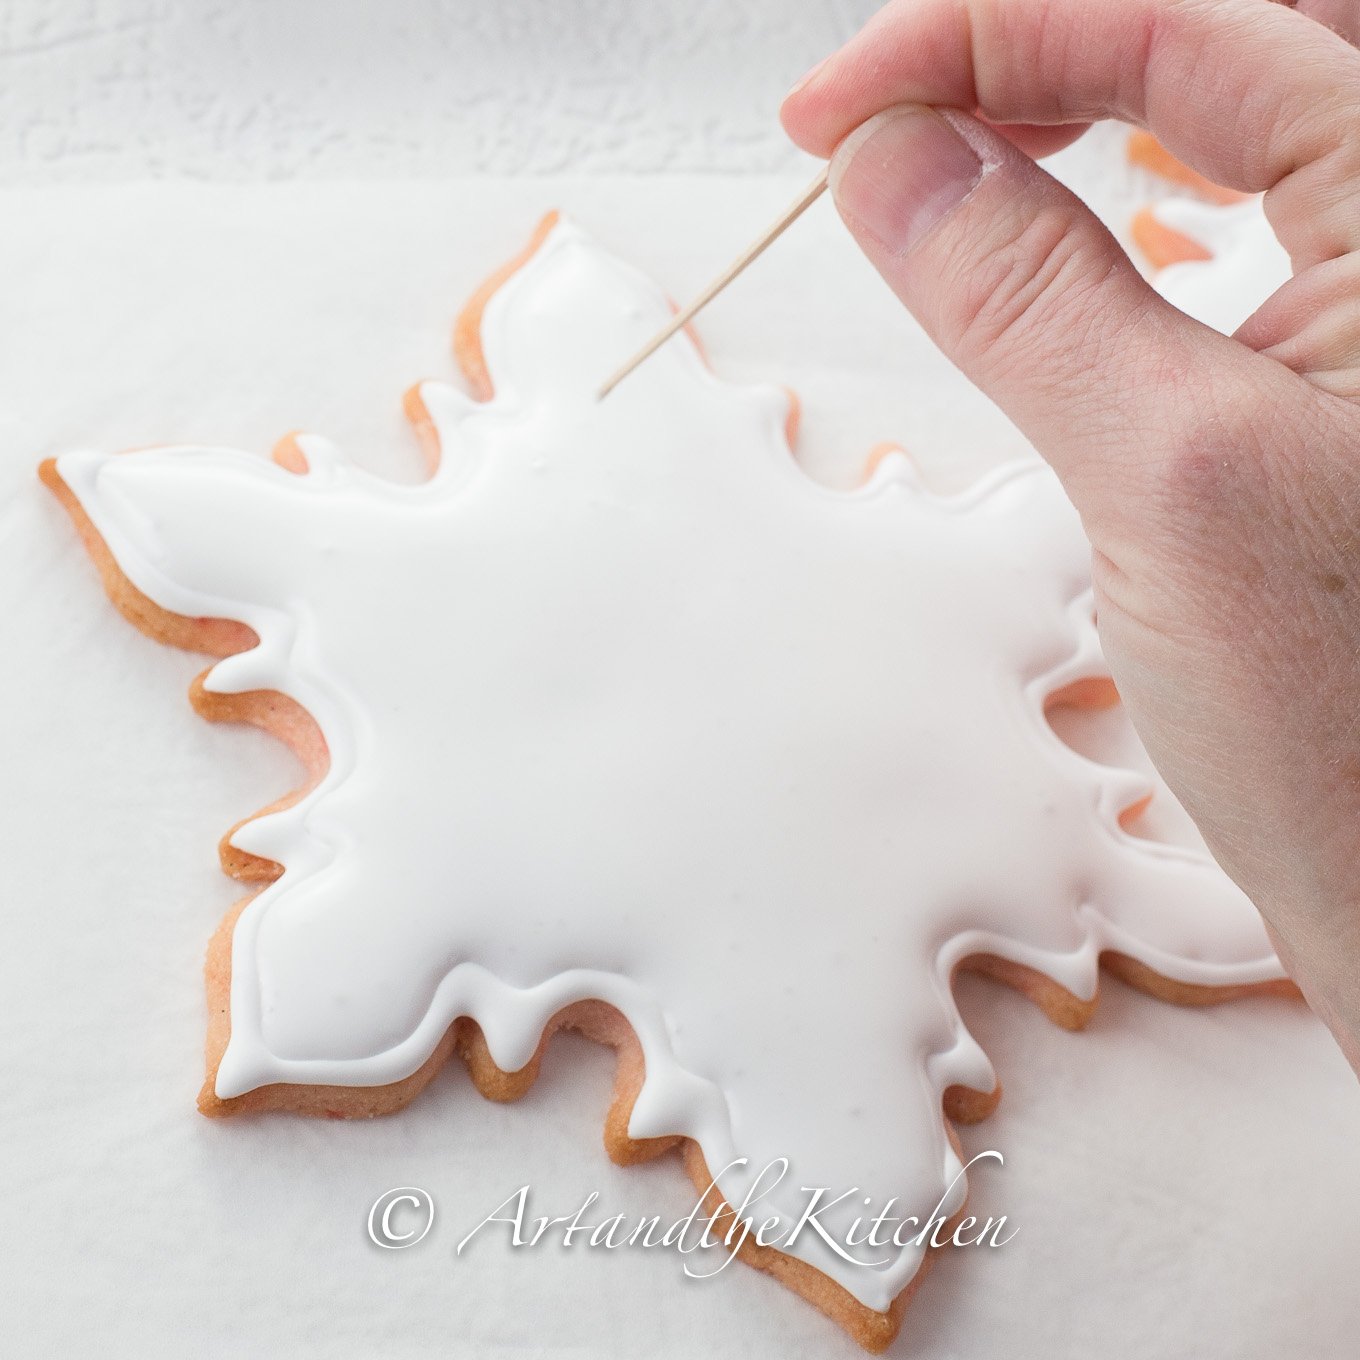 Snowflake shaped cookie coated in white royal icing.